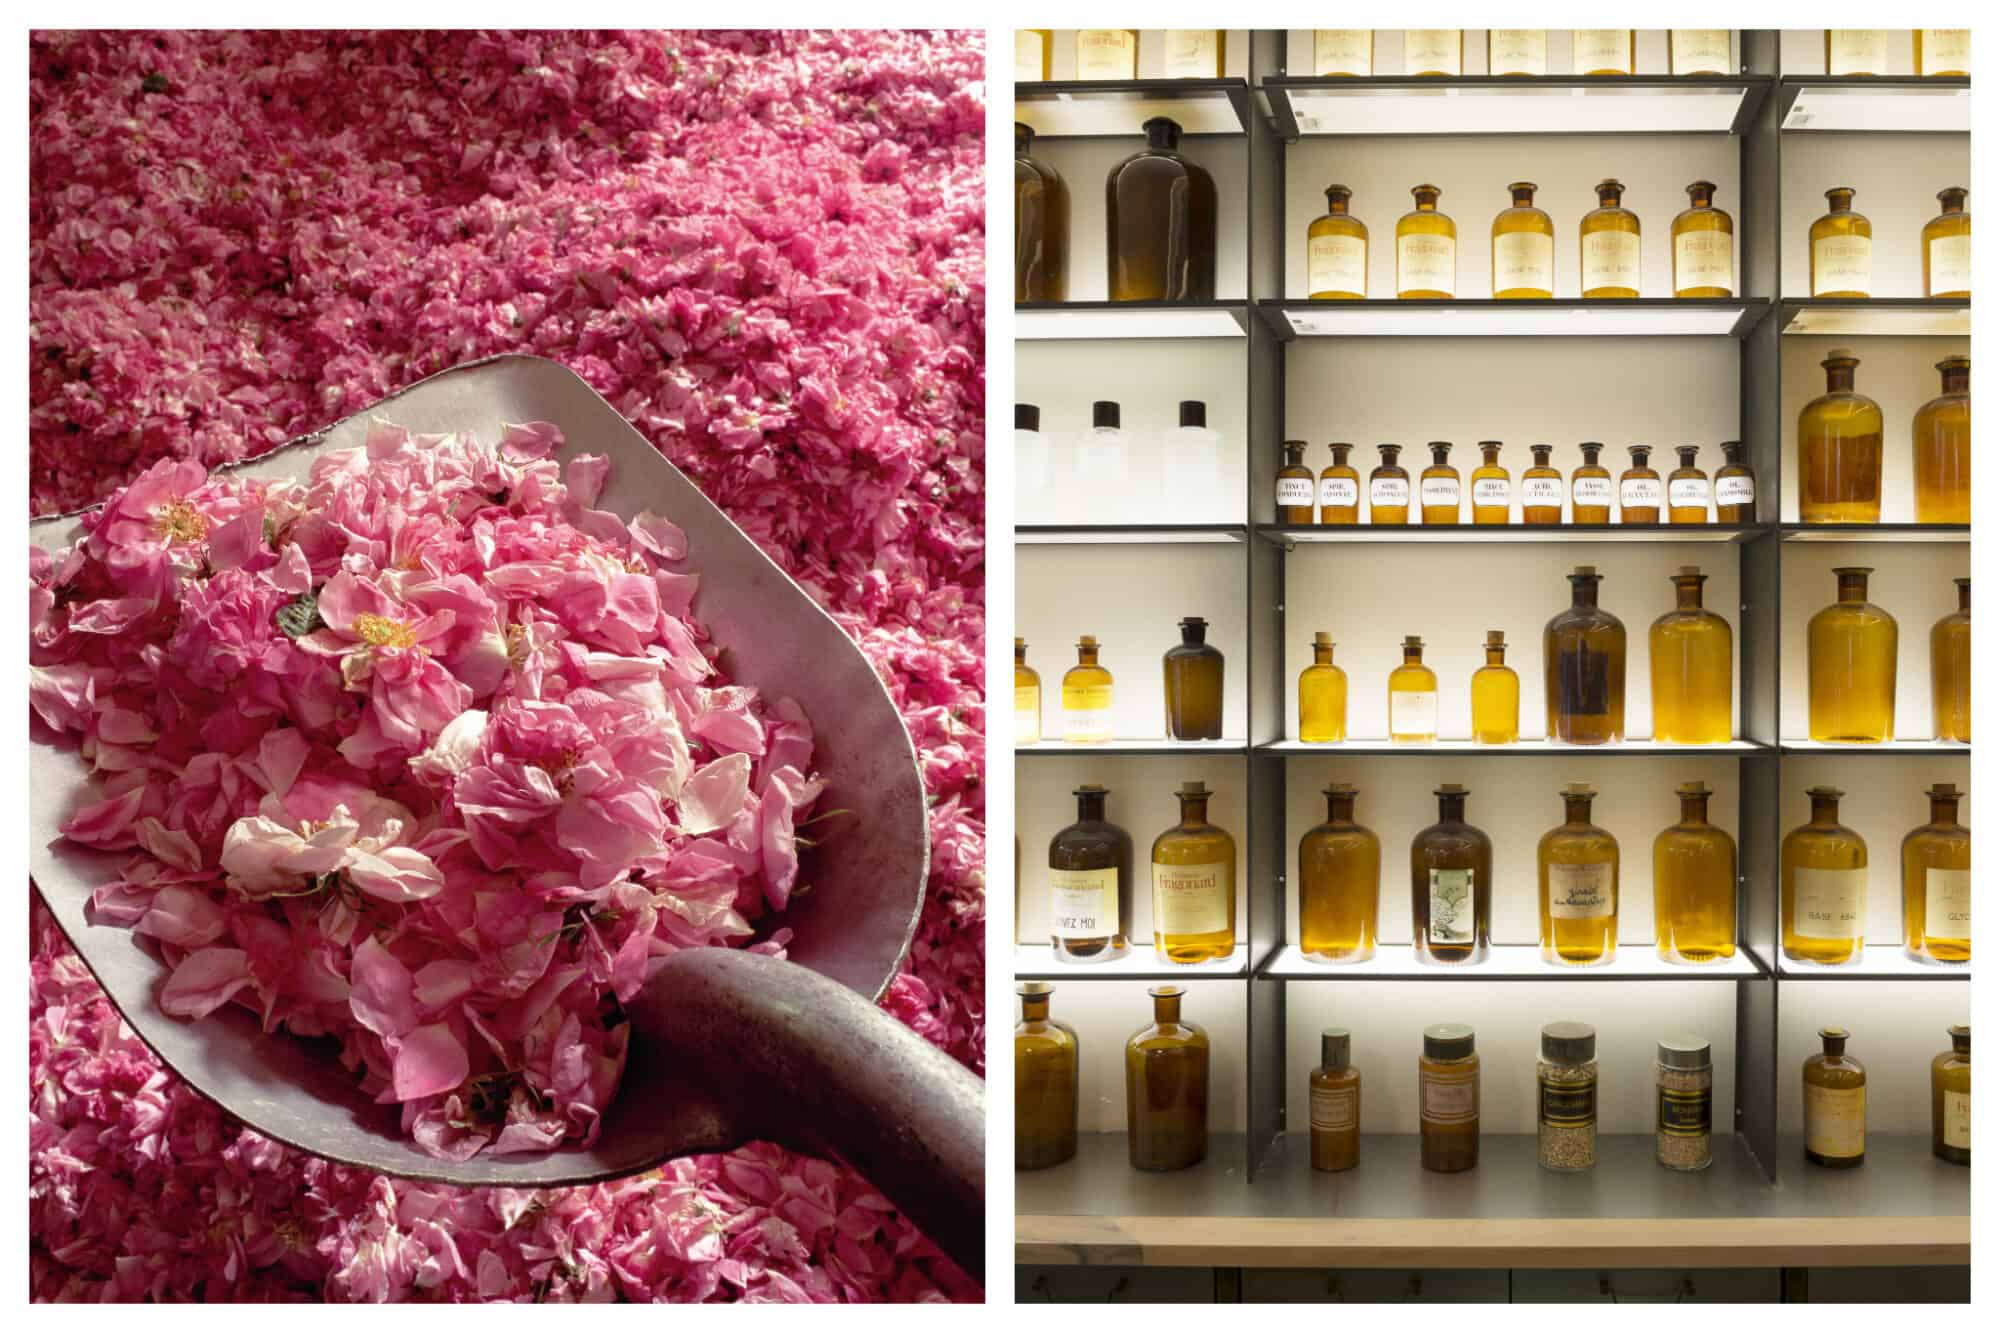 Left: A pale lifts bright pink rose petals from a pile in early May, Right: Backlit bottles of perfume line shelves in a Fragonard store in Paris